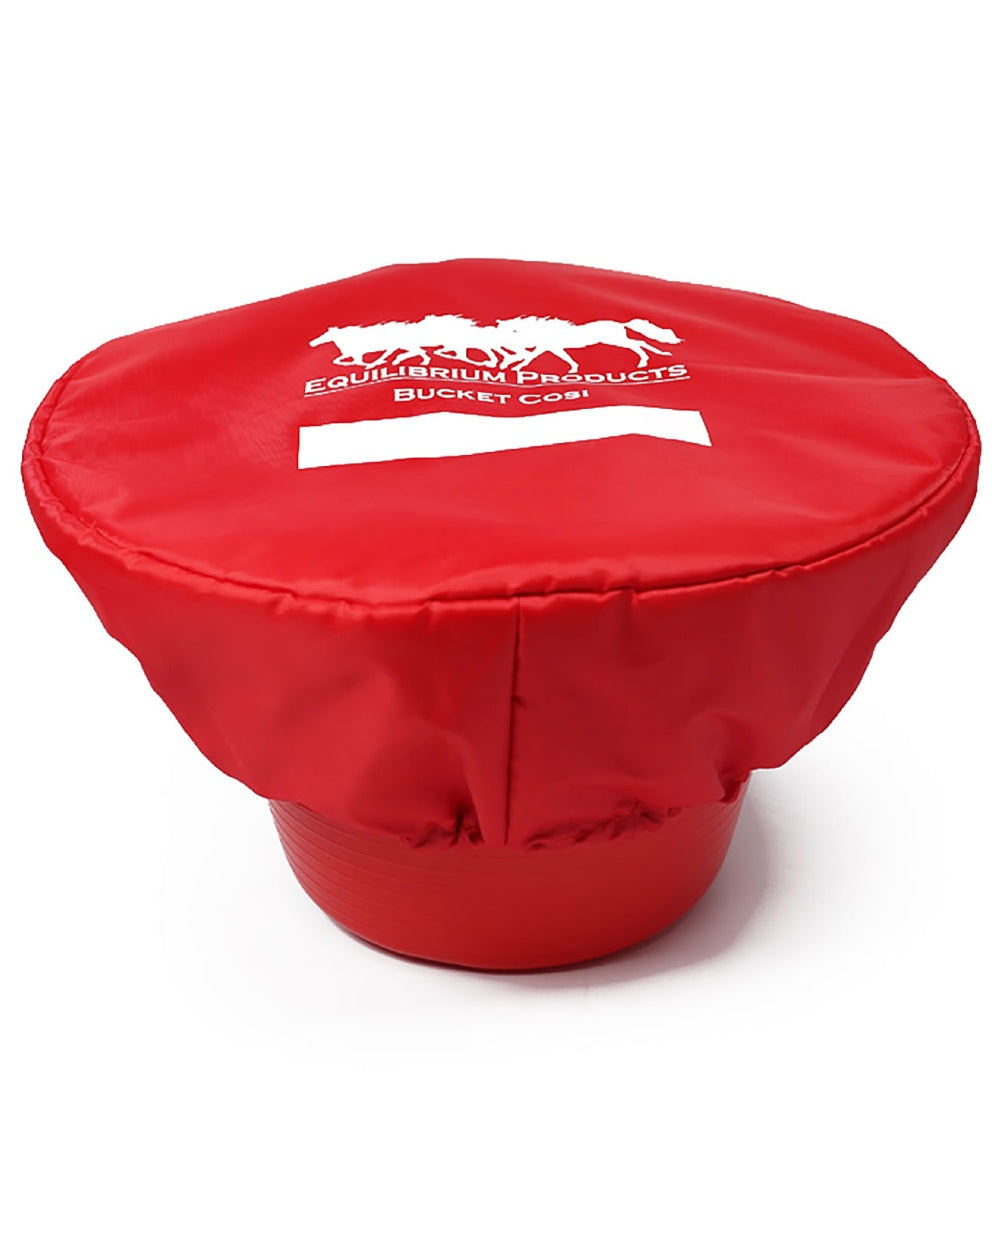 Red coloured Equilibrium Bucket Cosi on white background 